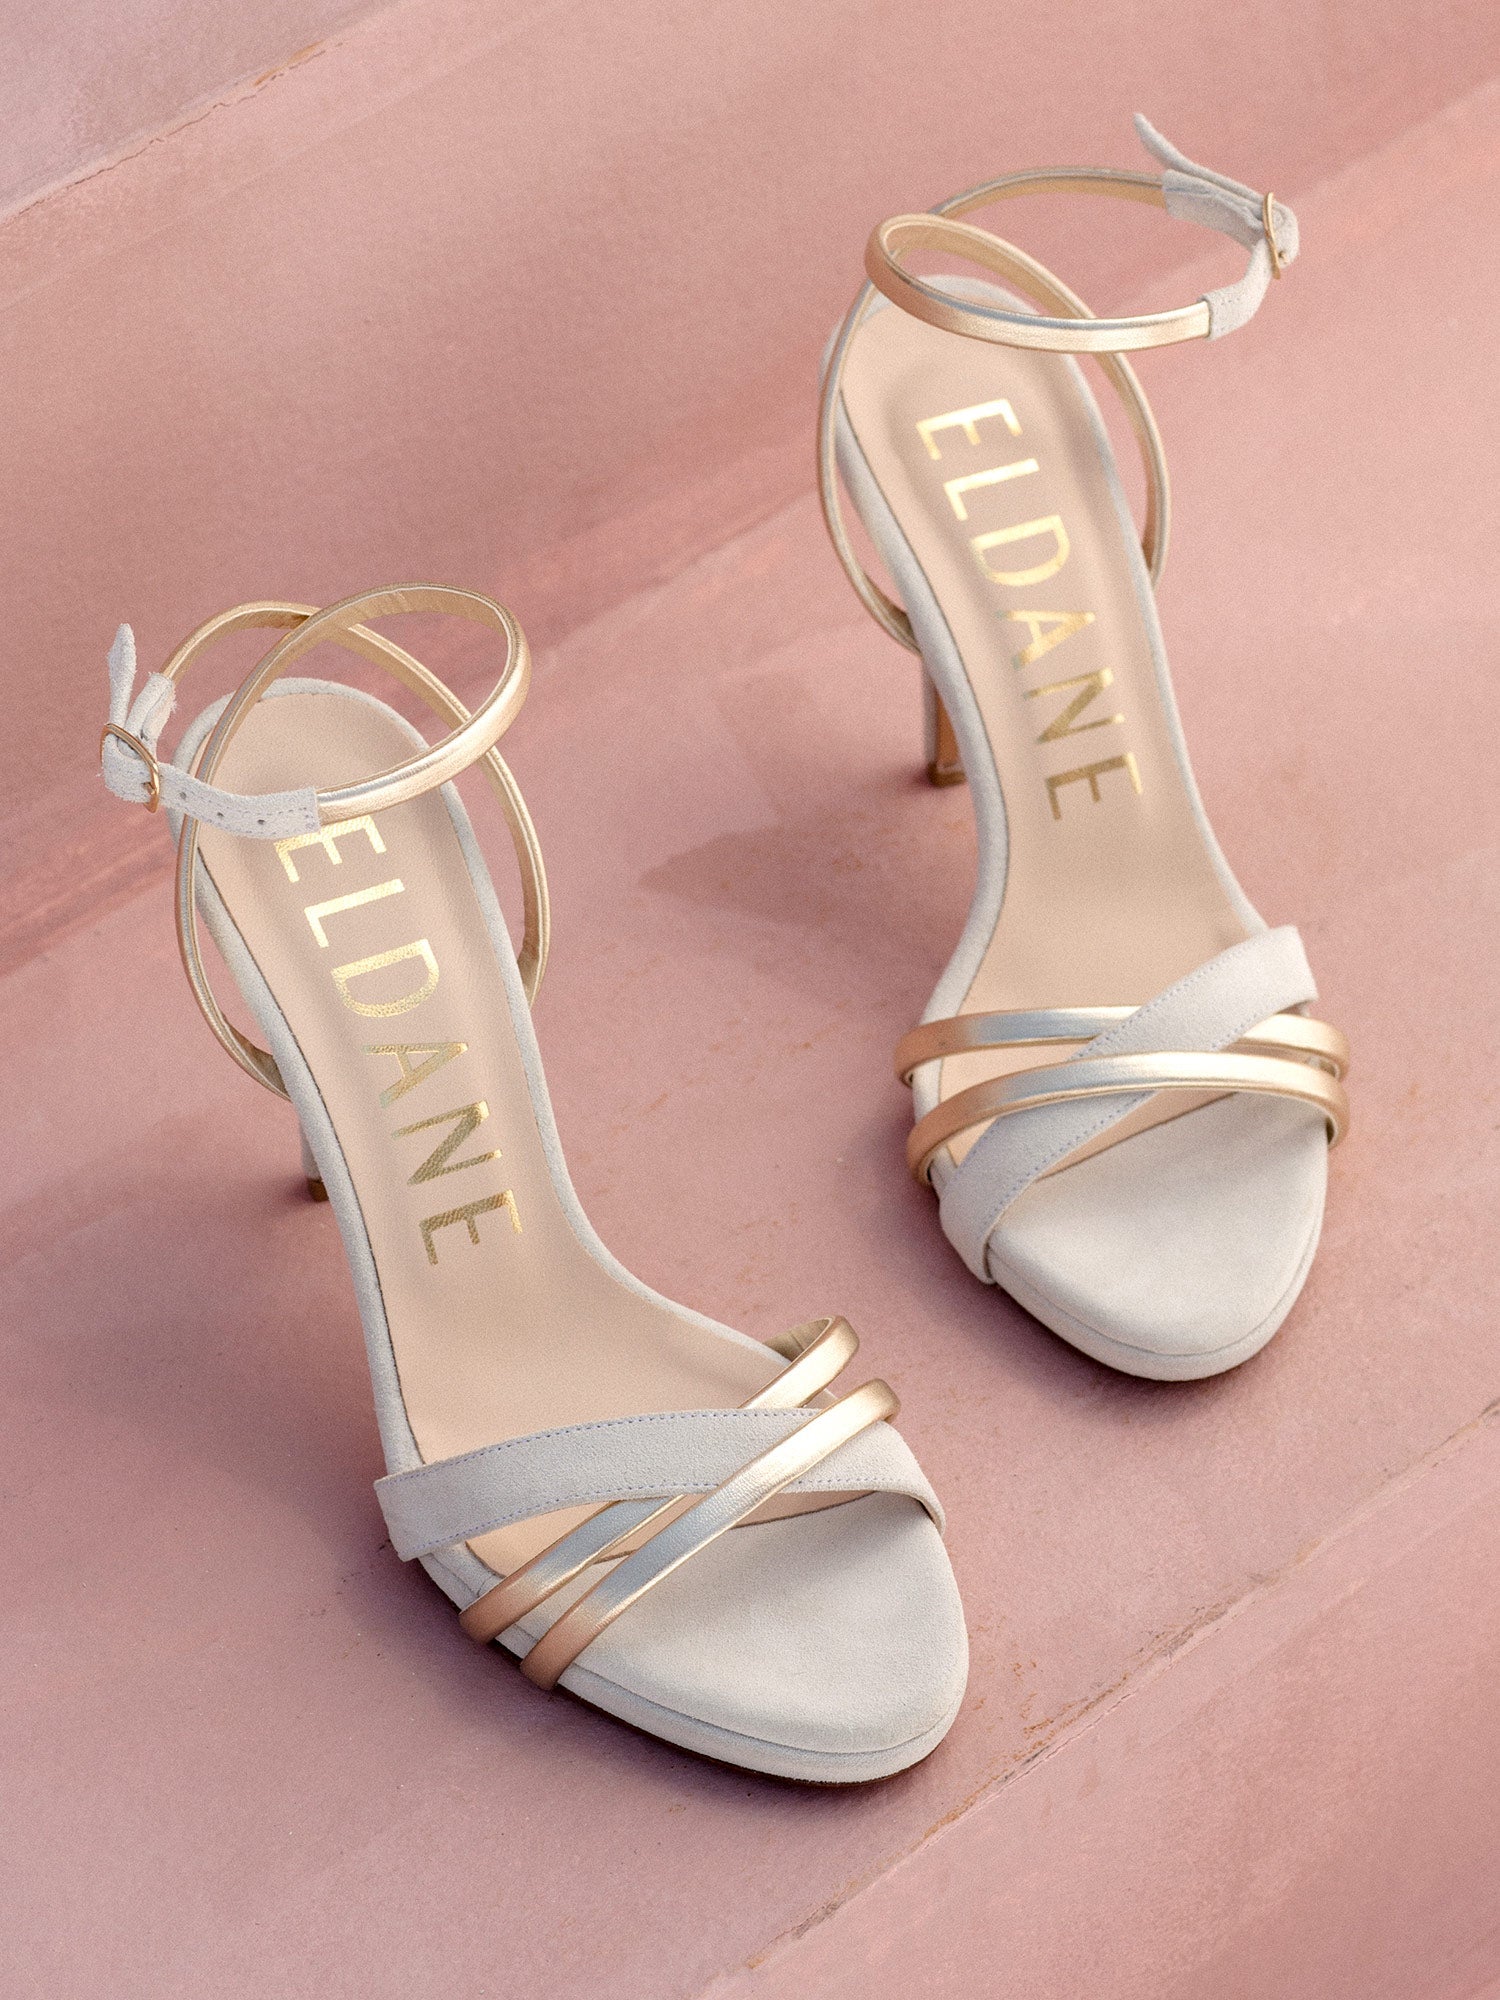 Heeled leather sandals in white and gold